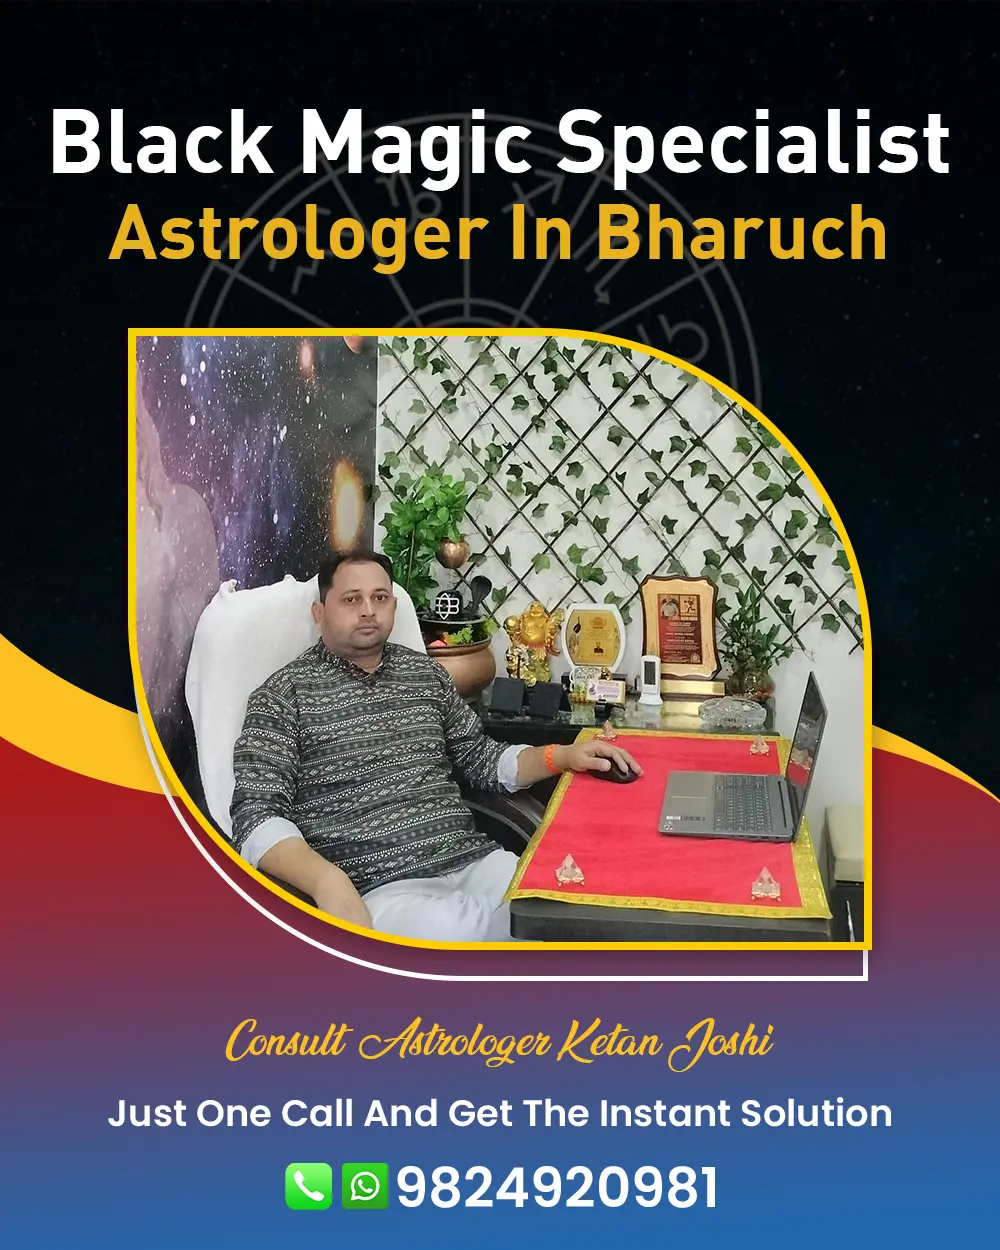 Black Magic Specialist Astrologer In Bharuch